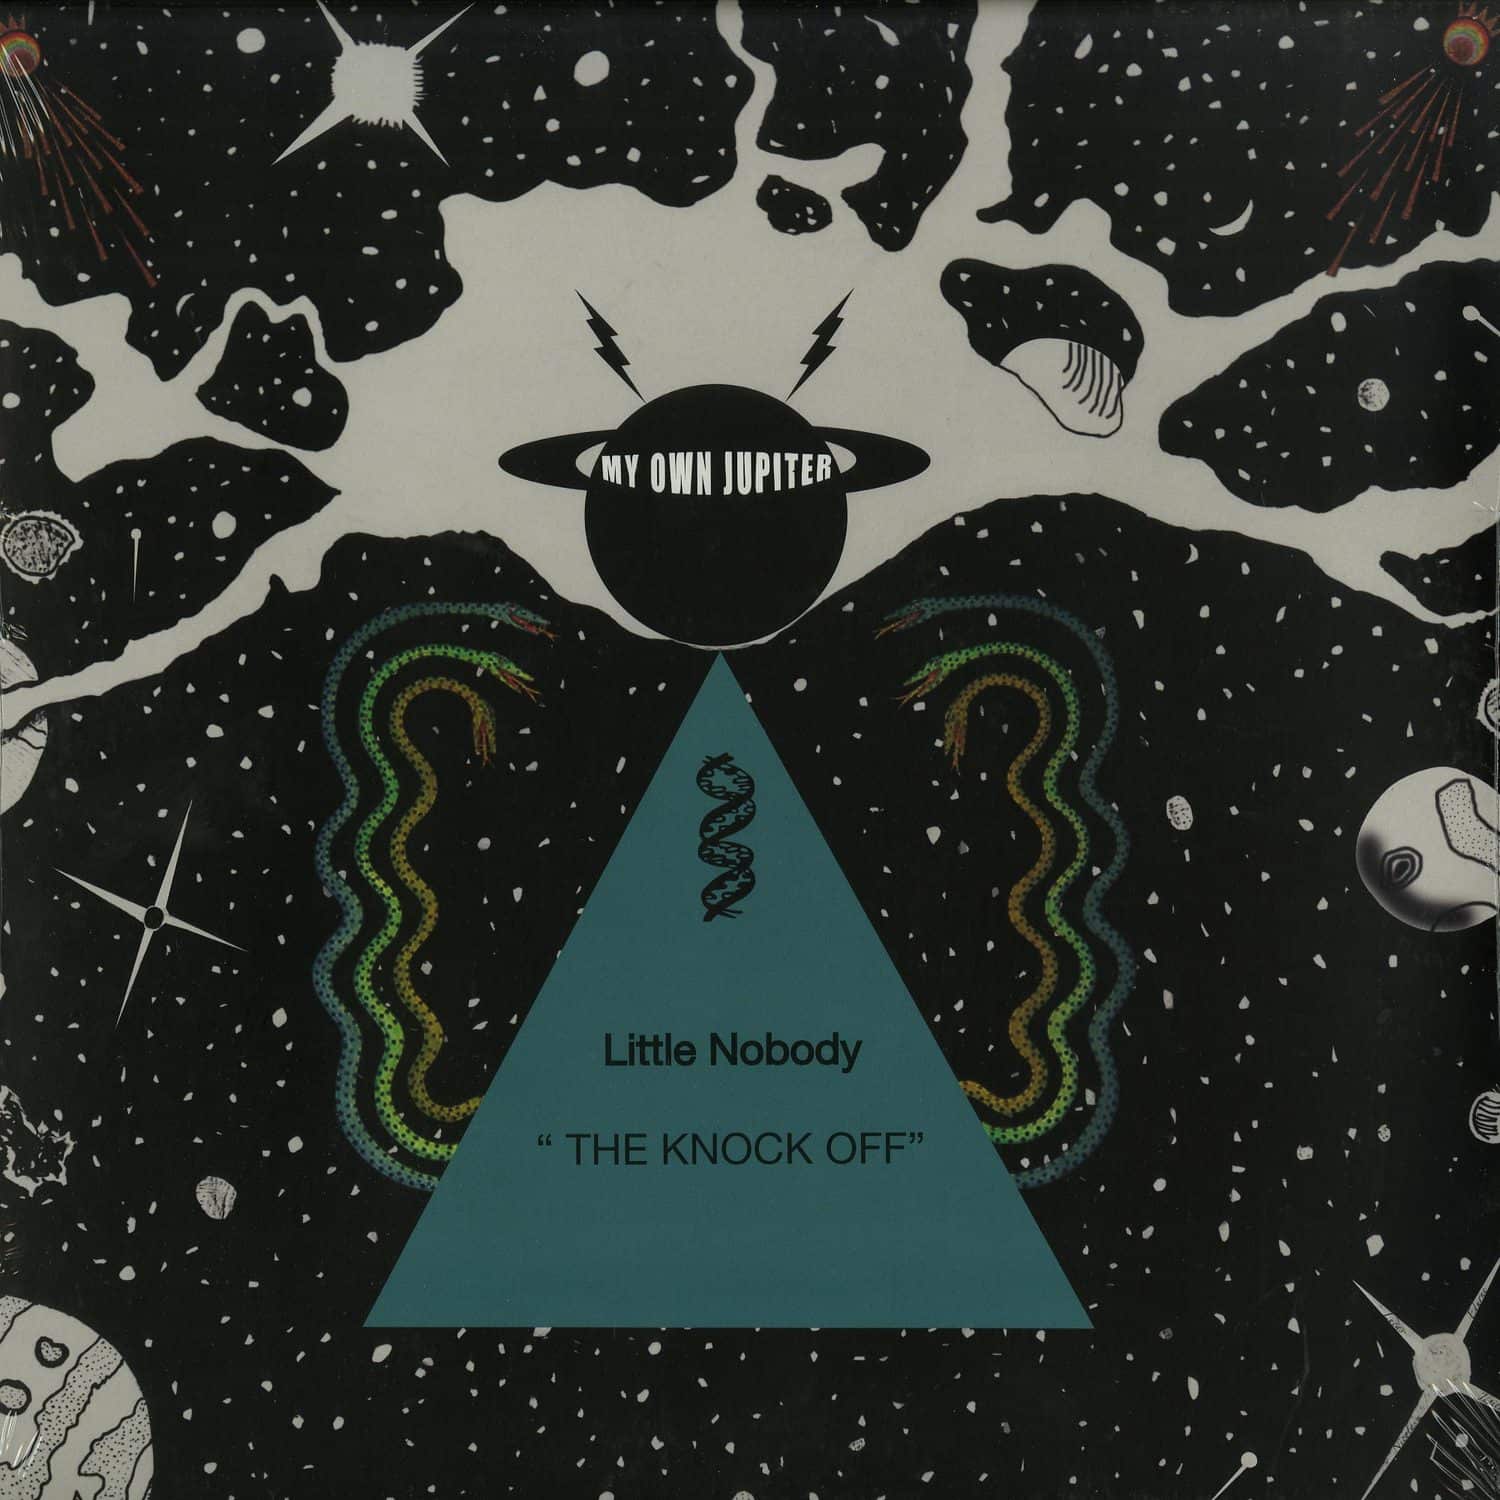 Little Nobody - THE KNOCK OFF